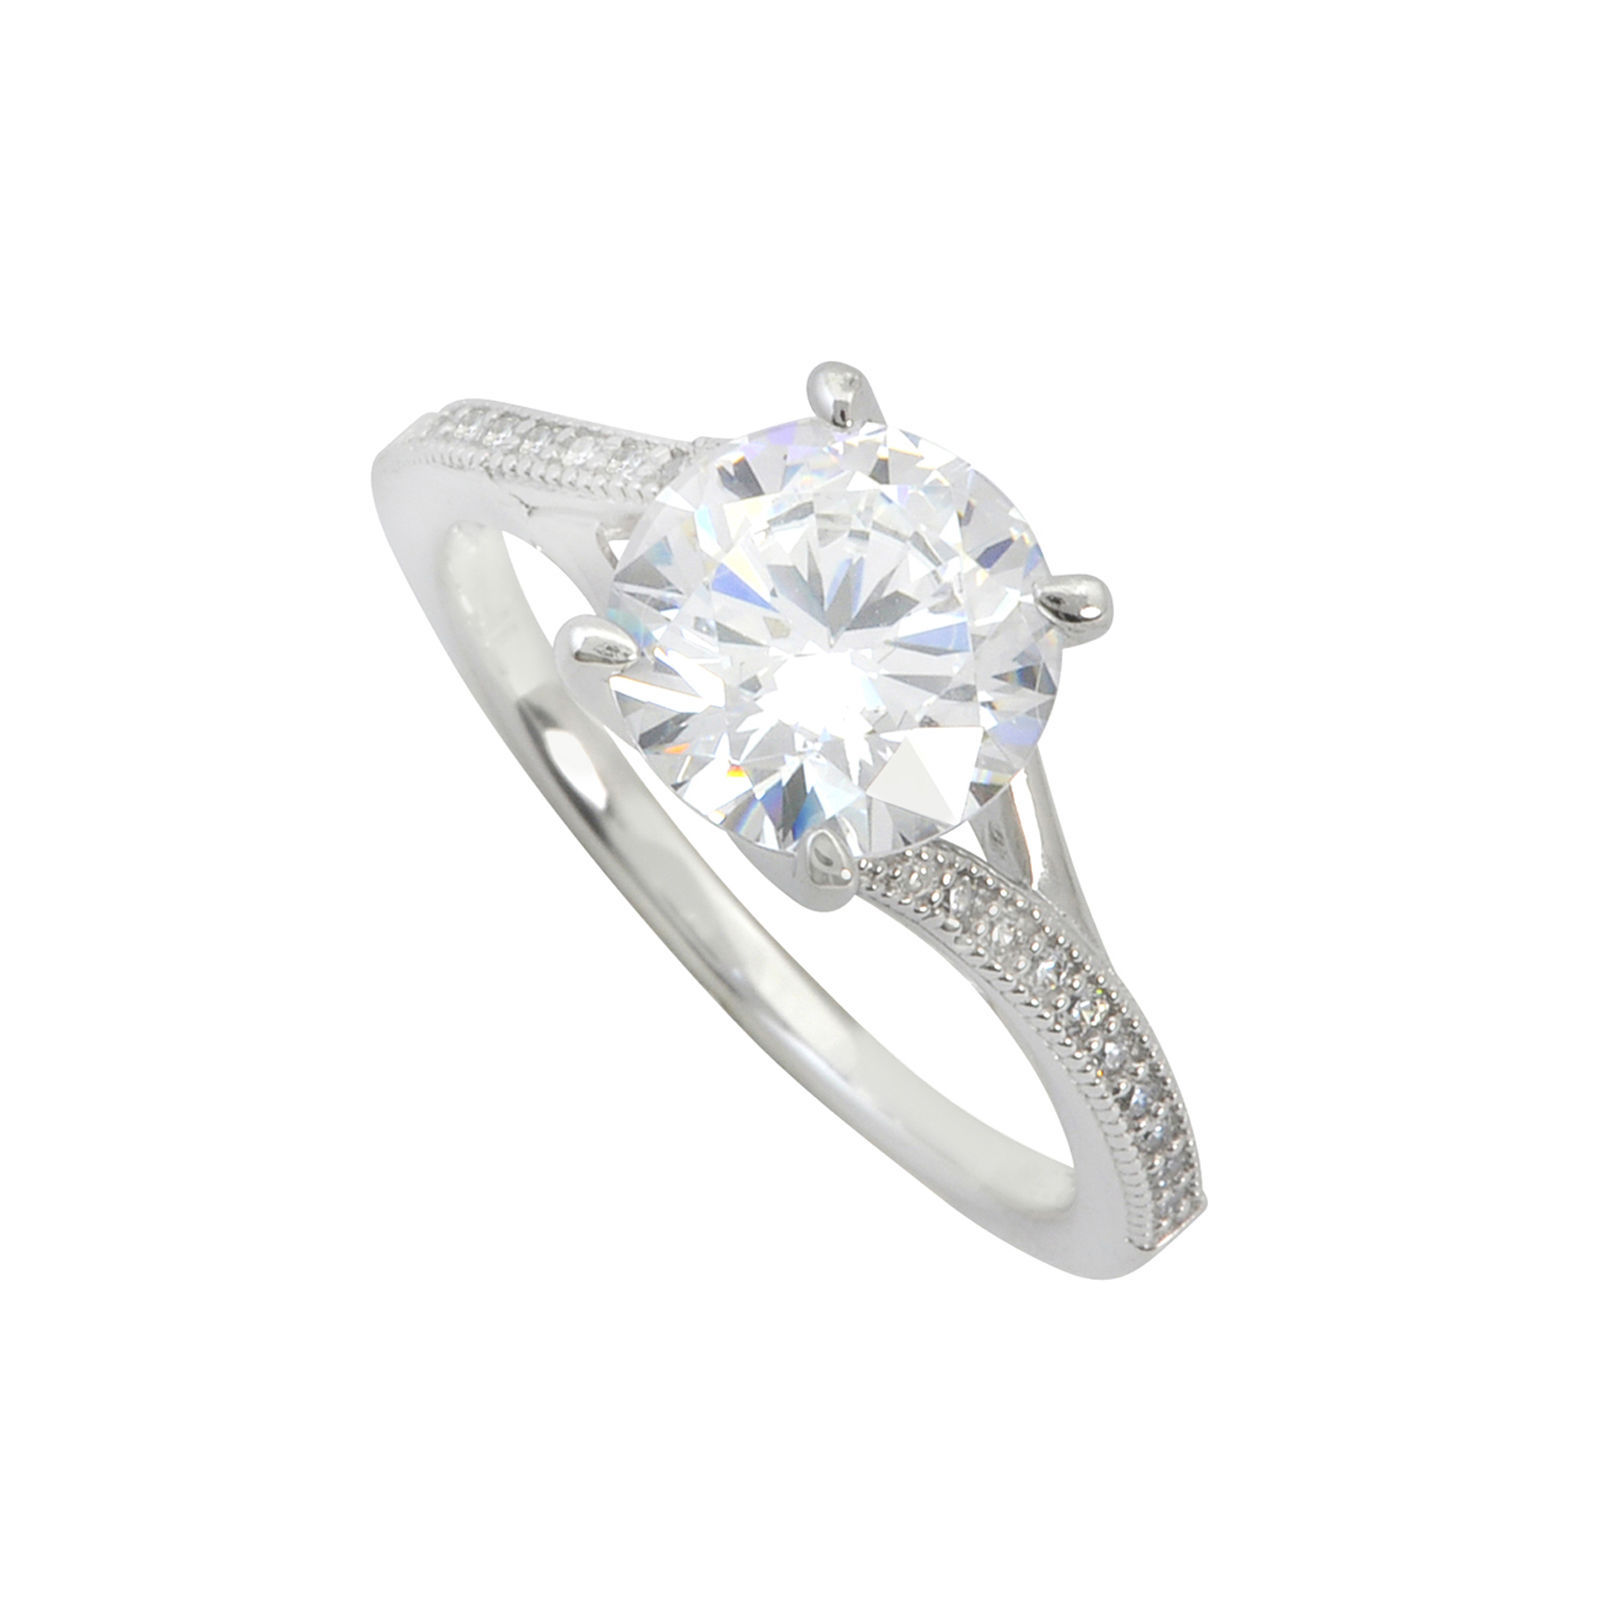 Primary image for Sterling Silver CZ Ring 8mm Round Center Stone with Accent Stones